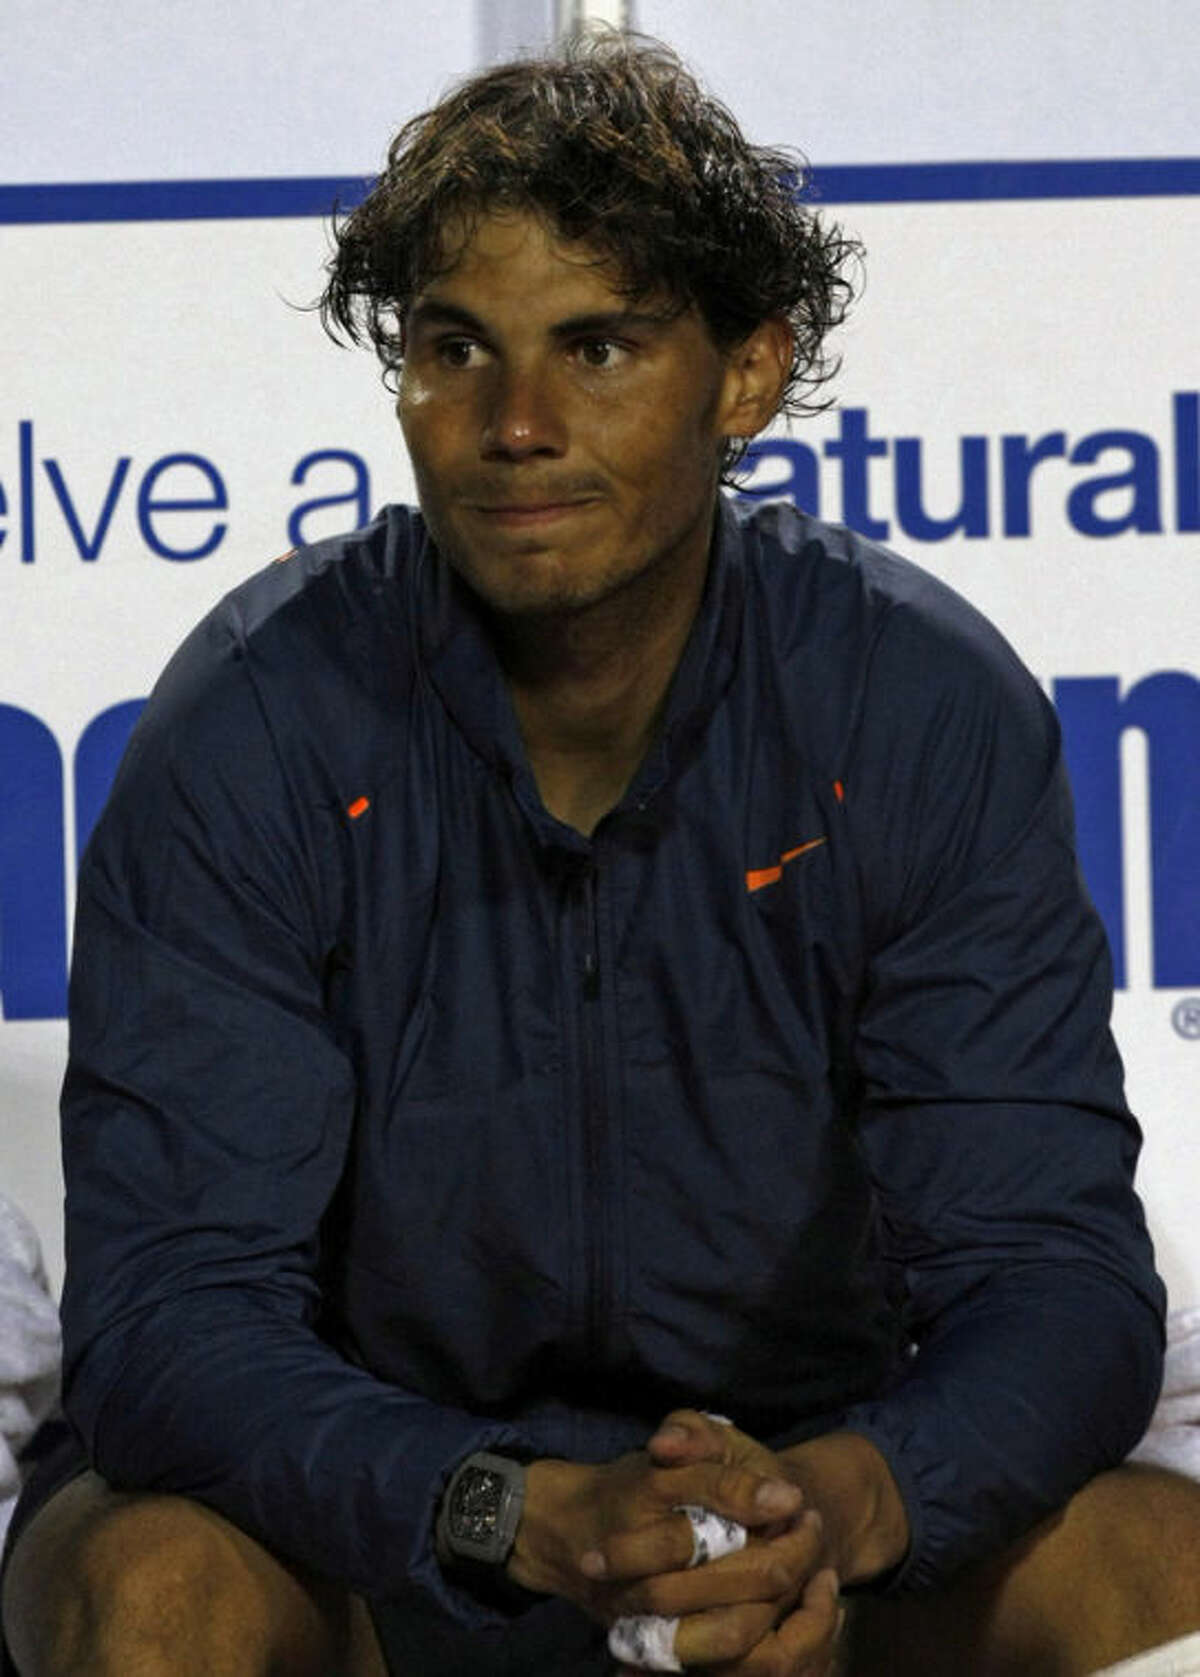 Spain's Rafael Nadal sits at the end of the VTR Open final tennis game against Argentina's Horacio Zeballos in Vina del Mar, Chile, Sunday, Feb. 10, 2013. Nadal lost to Zeballos 6-7 (2), 7-6 (6), 6-4 in Sunday's final of the VTR Open, the Spaniard's comeback tournament after seven months out with a torn tendon in his left knee. (AP Photo/Luis Hidalgo)